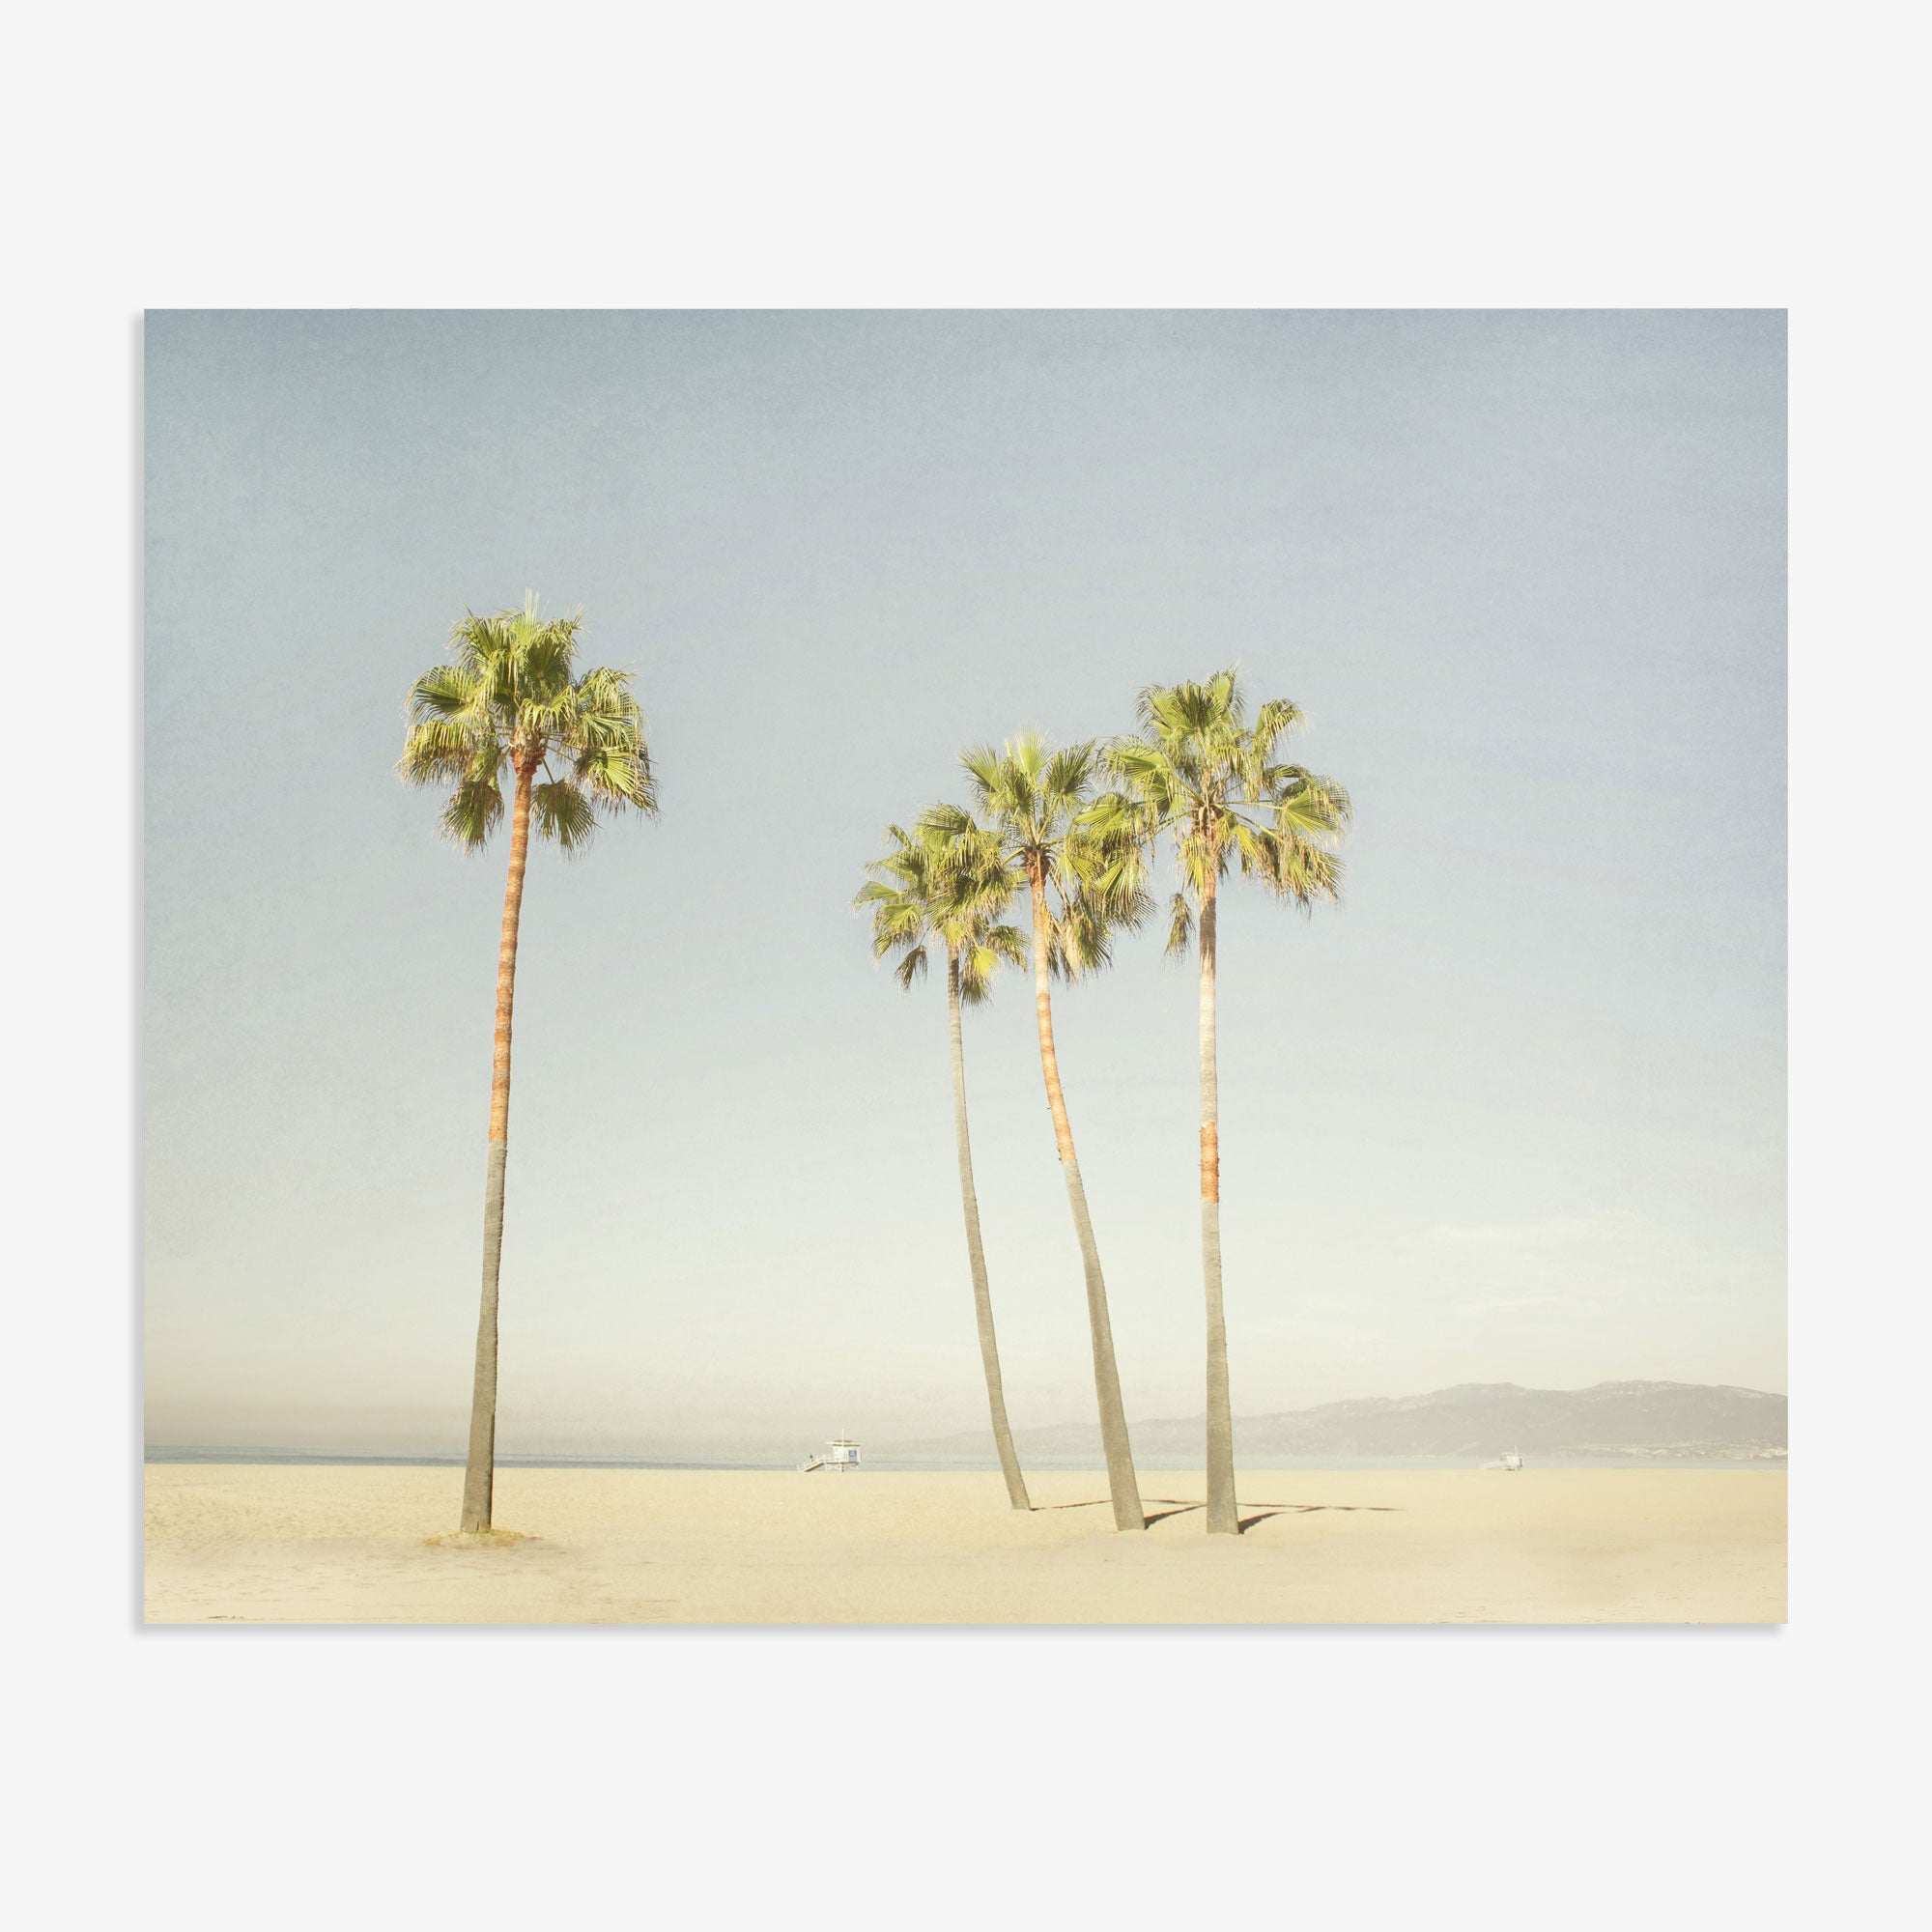 Five palm trees on a sandy beach under a clear sky, with two people sitting distantly in the background. The scene, captured on Venice Beach, conveys a peaceful, sunny day. Experience it for yourself with the Offley Green California Venice Beach Print &#39;Boardwalk Palms&#39;.